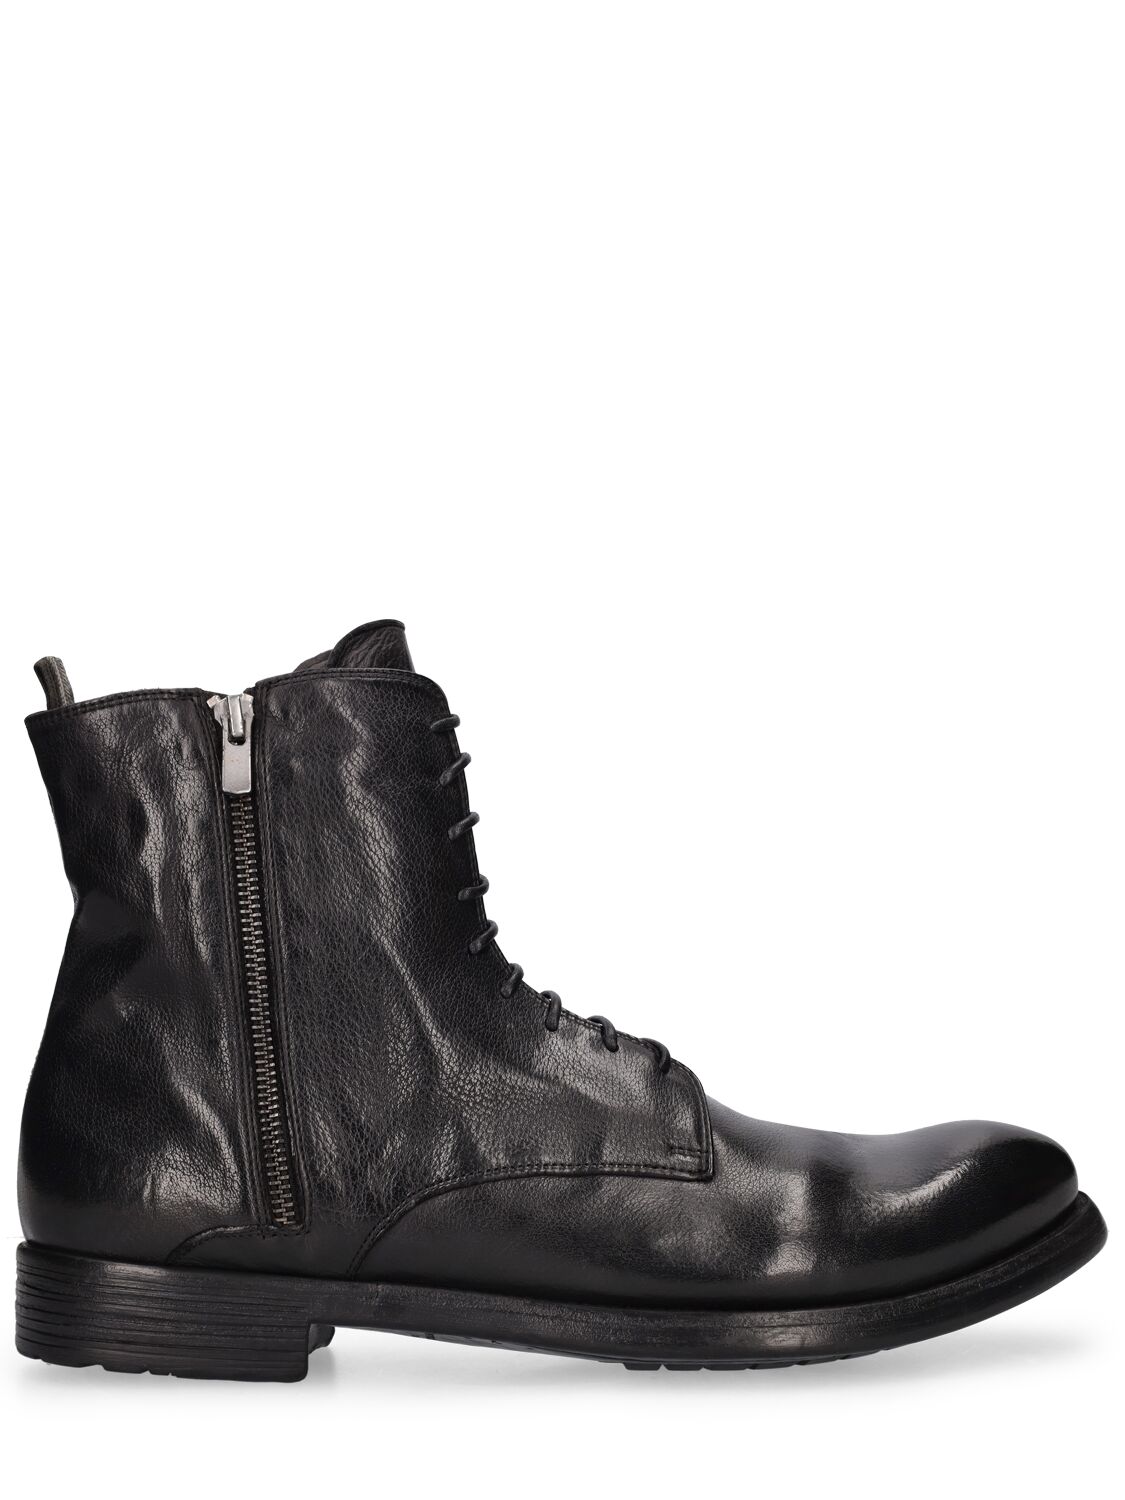 Officine Creative Hive Zipped Lace-up Boots In Black | ModeSens